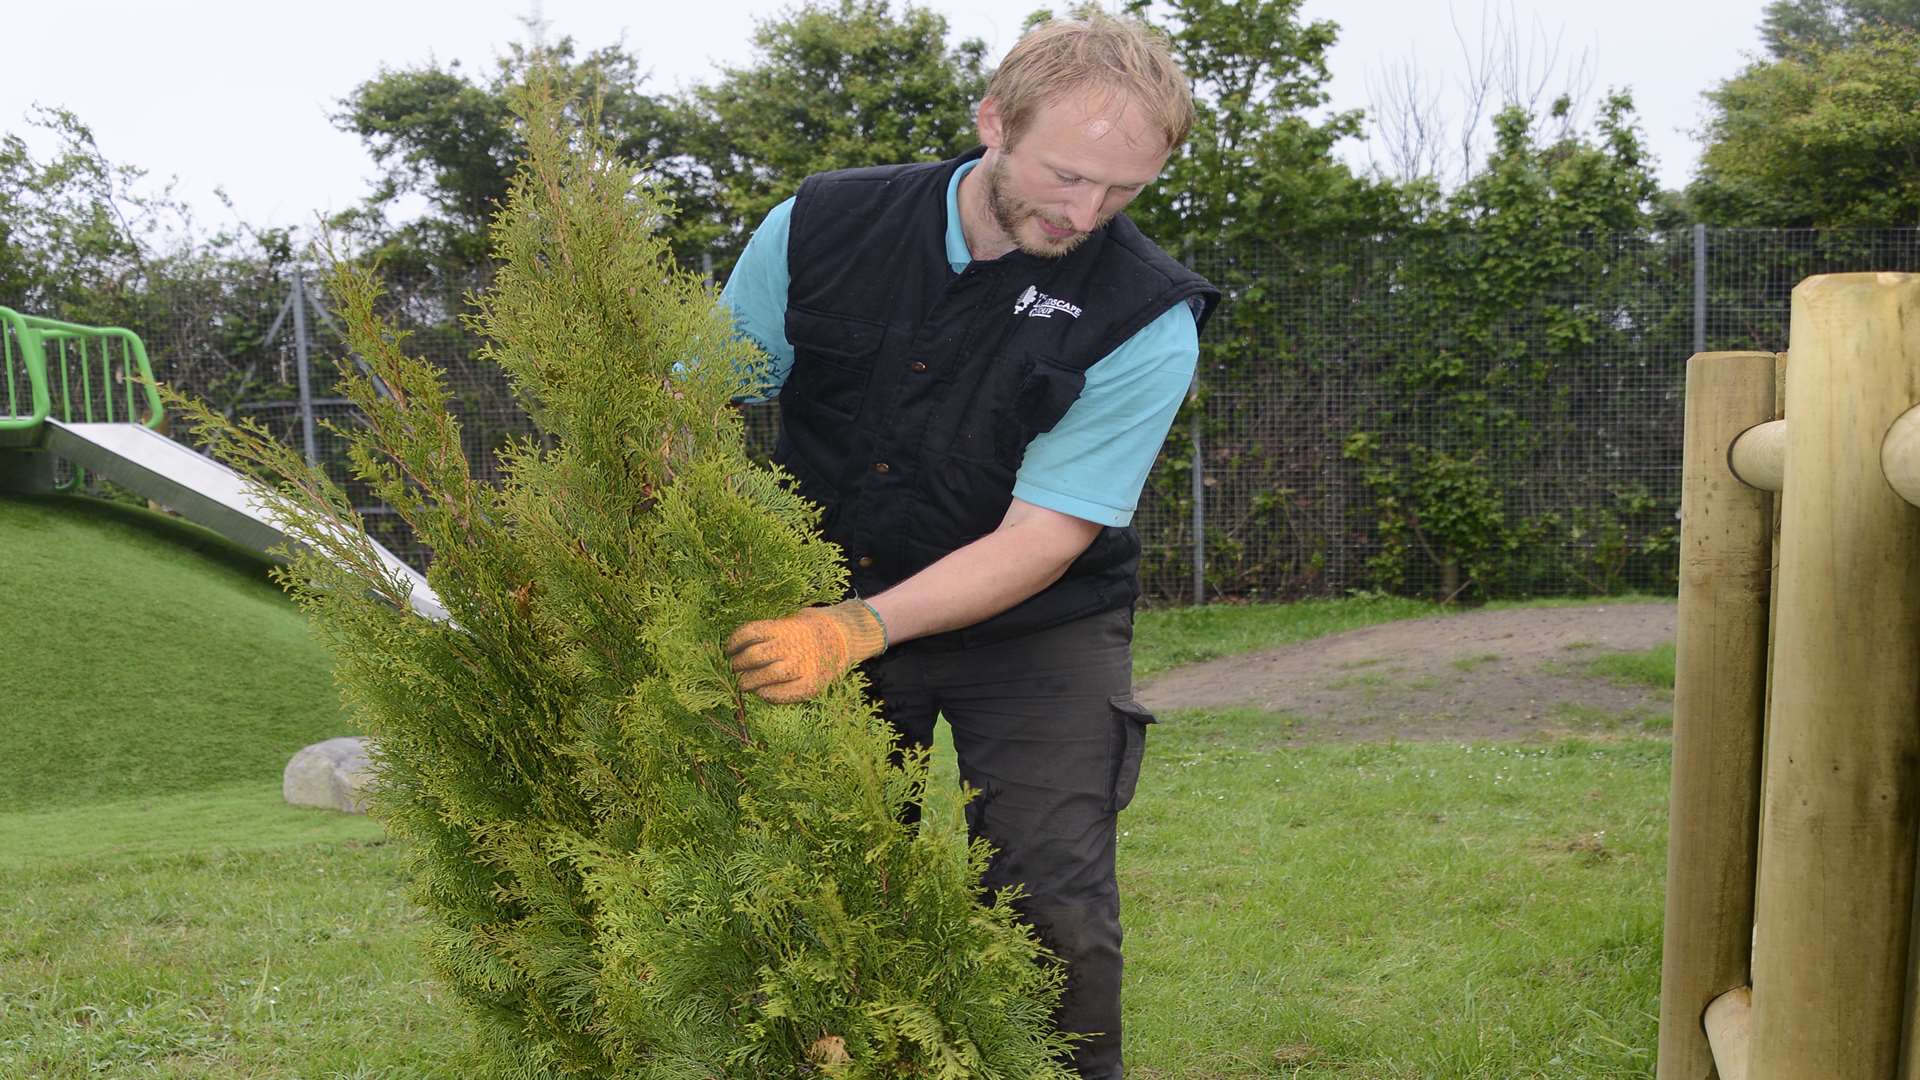 Deal North Park, Matthew Hutchings of The Landscape Group collects up the uprooted conifers in the Childrens play area to replant them